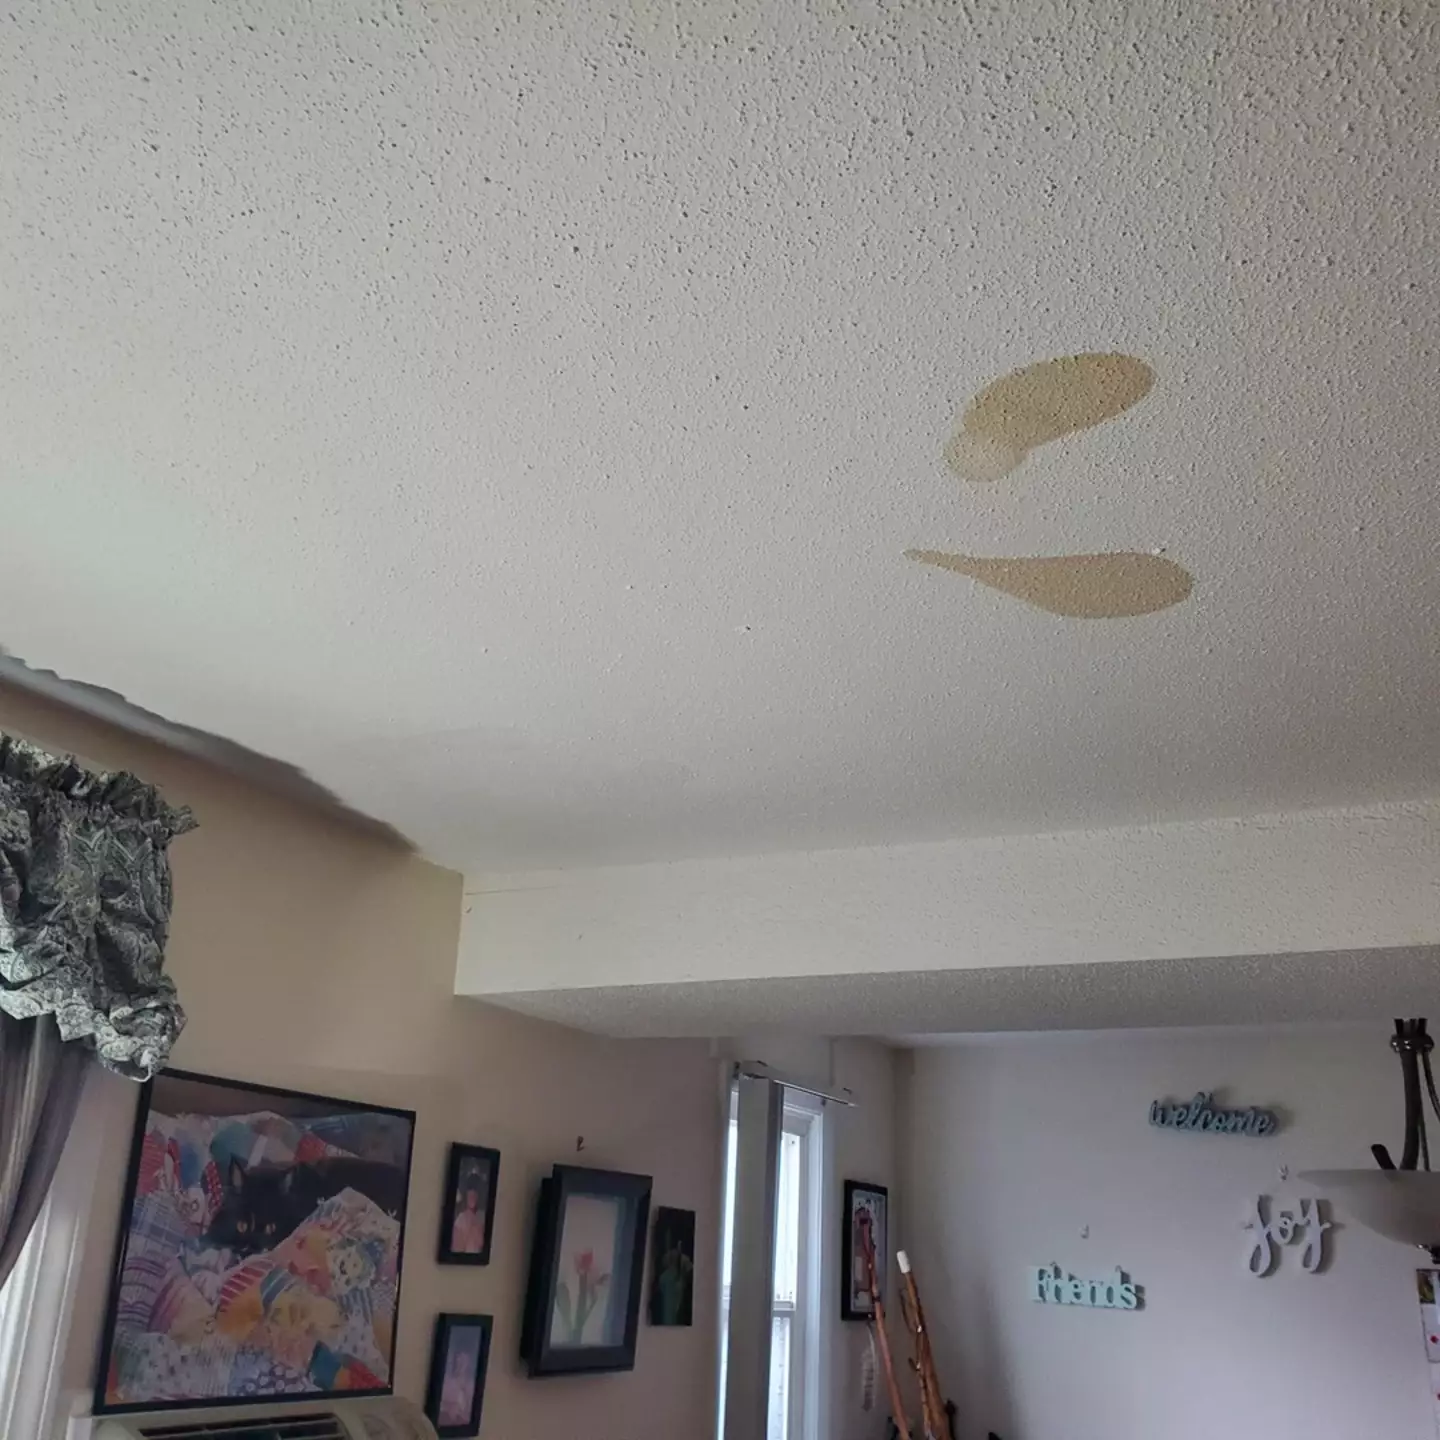 The woman shared a picture of her marked ceiling to Reddit.